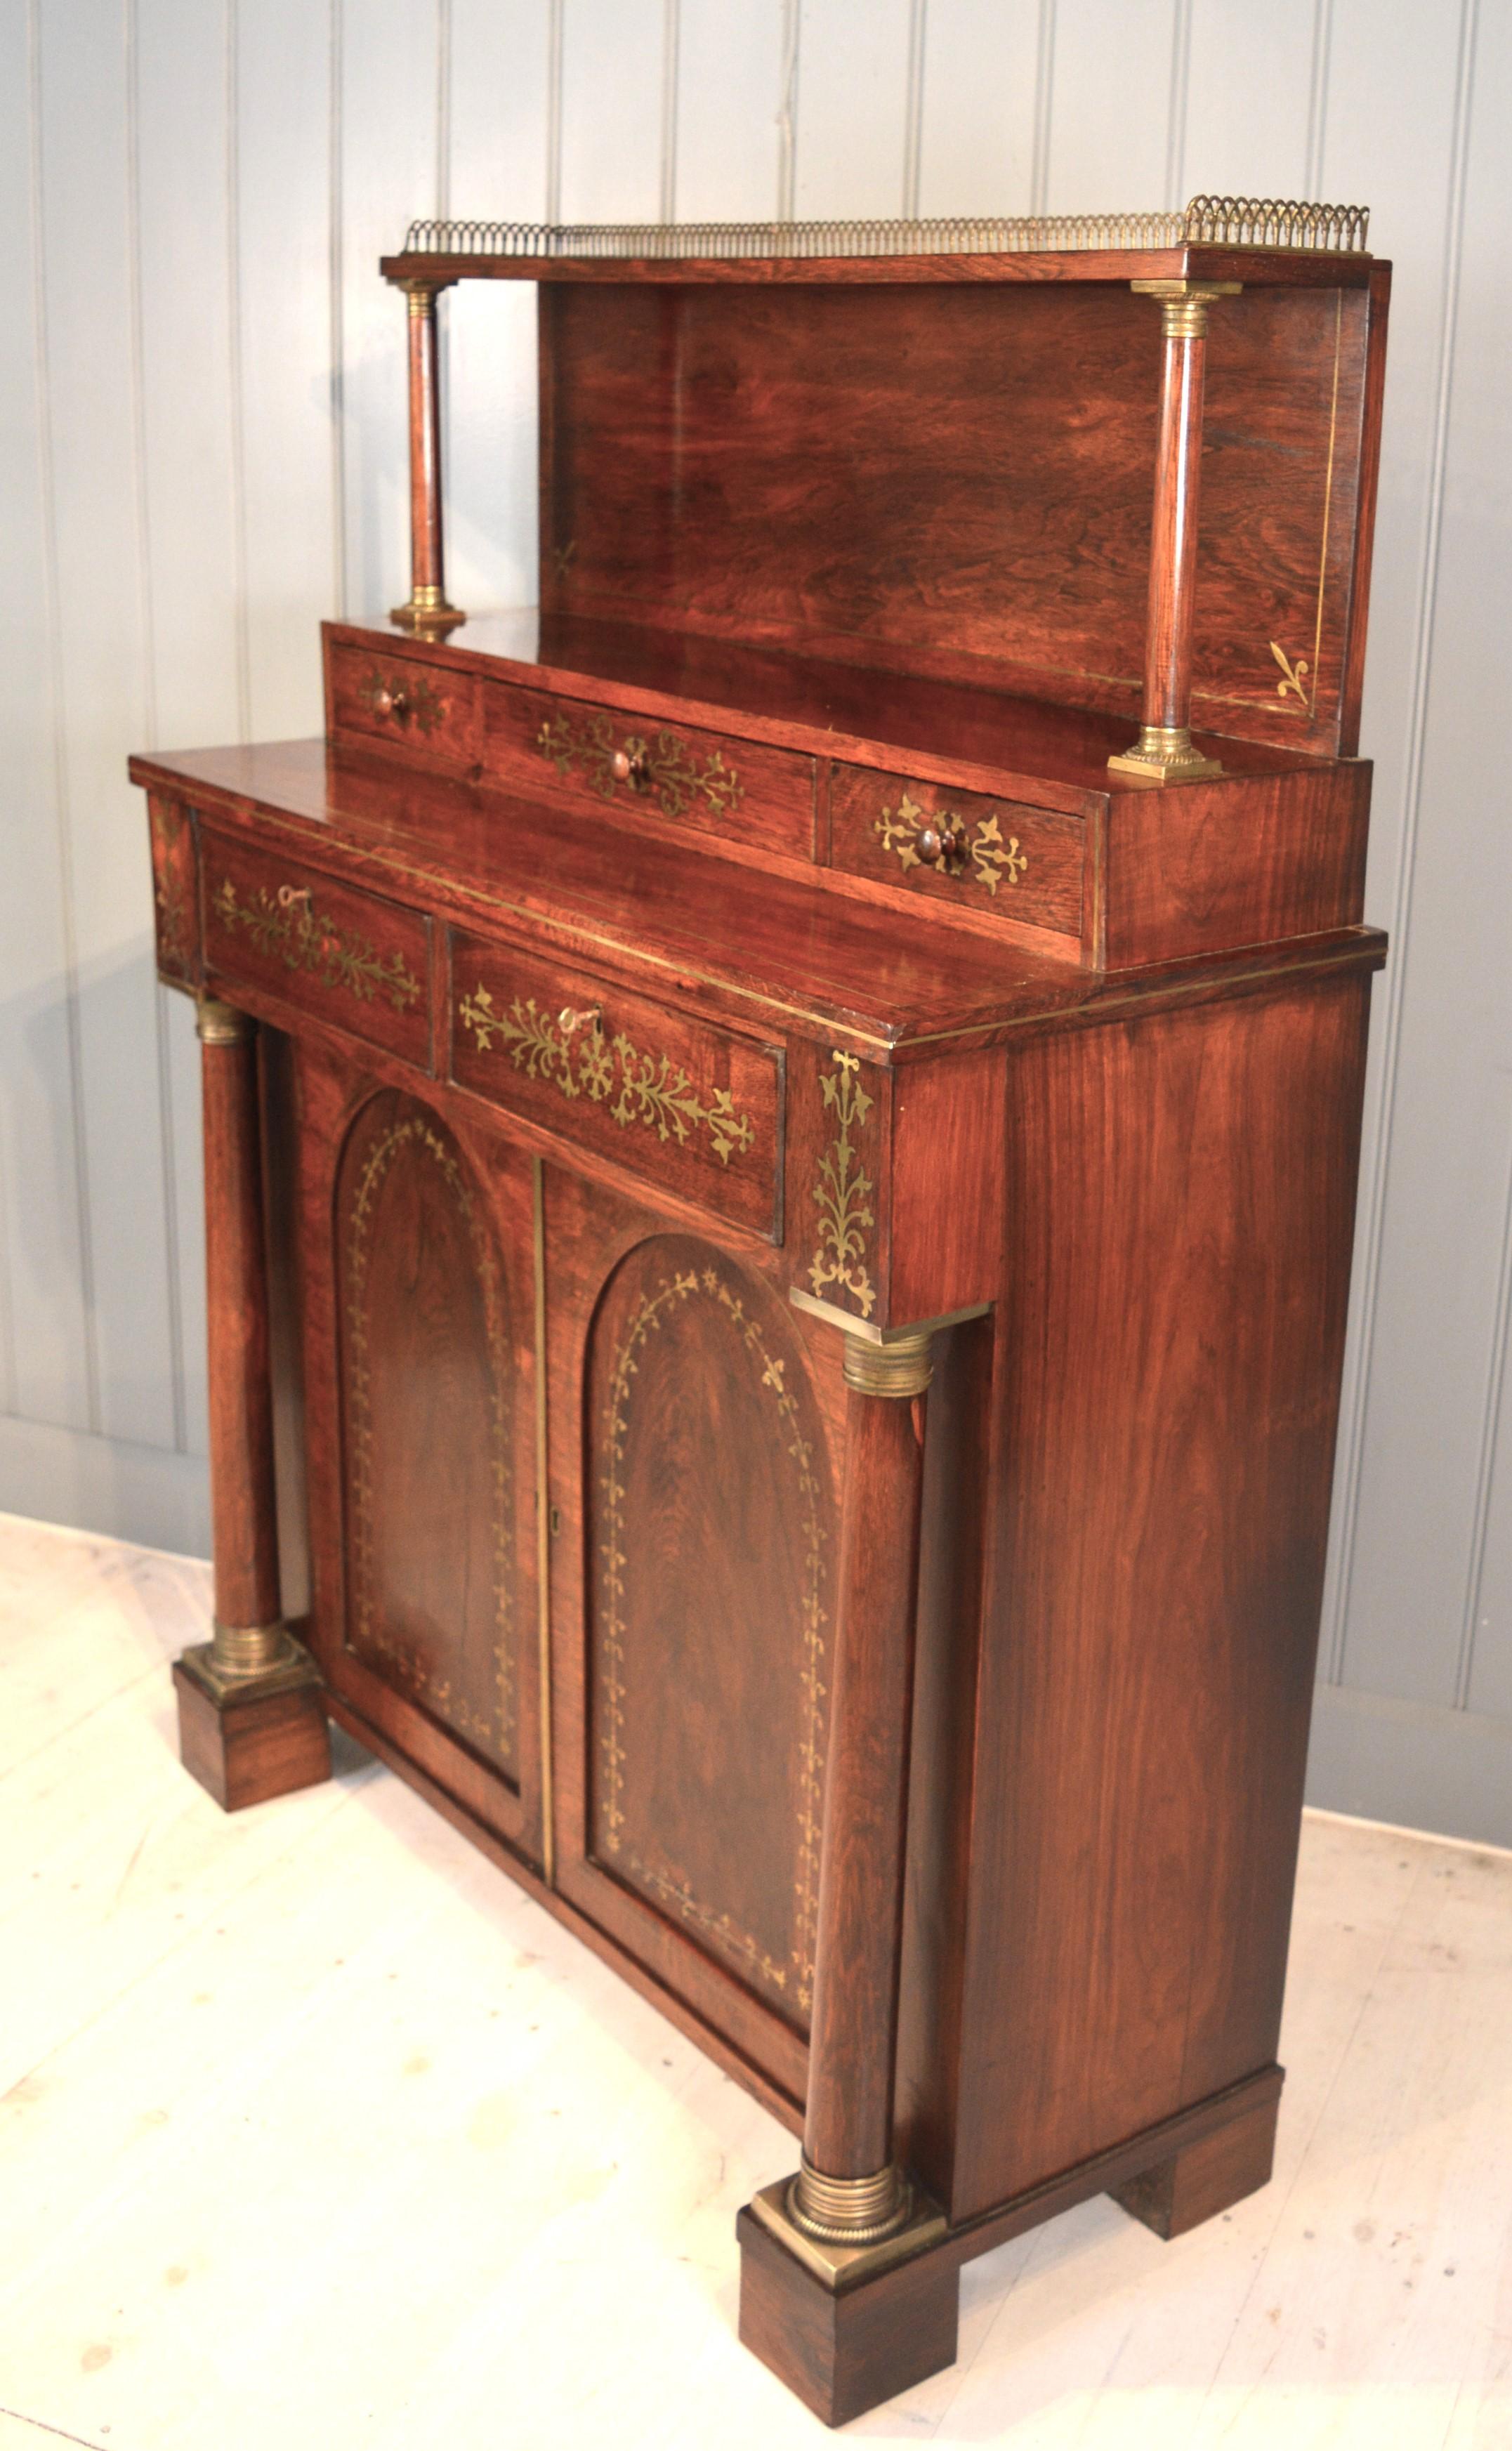 A very showy Regency side cabinet or chiffonier in Brazilian rosewood. English circa 1820 of very good quality having mahogany drawer linings even mahogany backboards. The veneers are chased with finely cut brass inlay decorating the entire front.